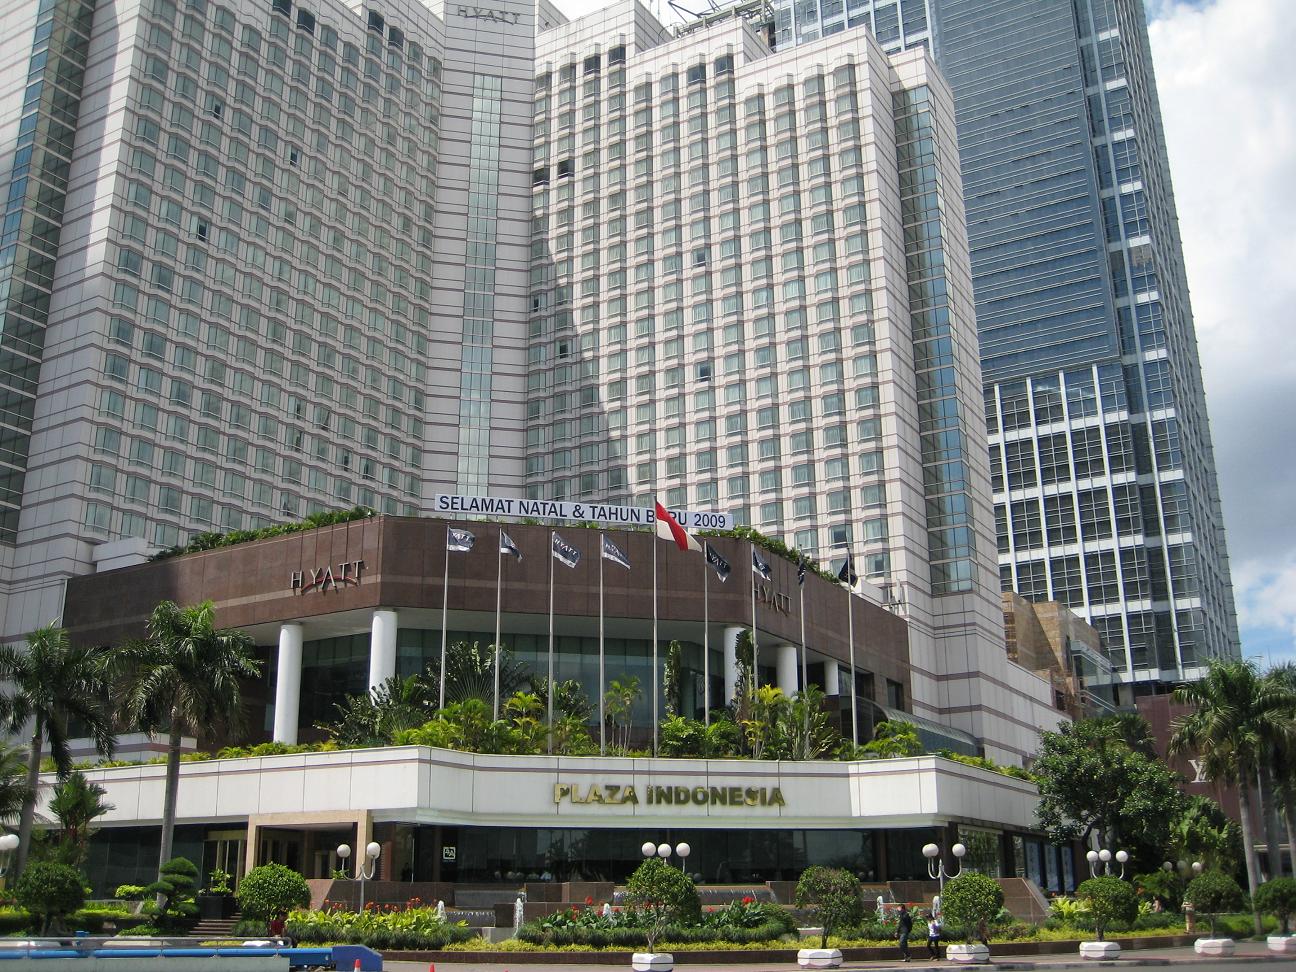 Download this Shopping Destinations Arespread Jakarta City Plaza Indonesia picture